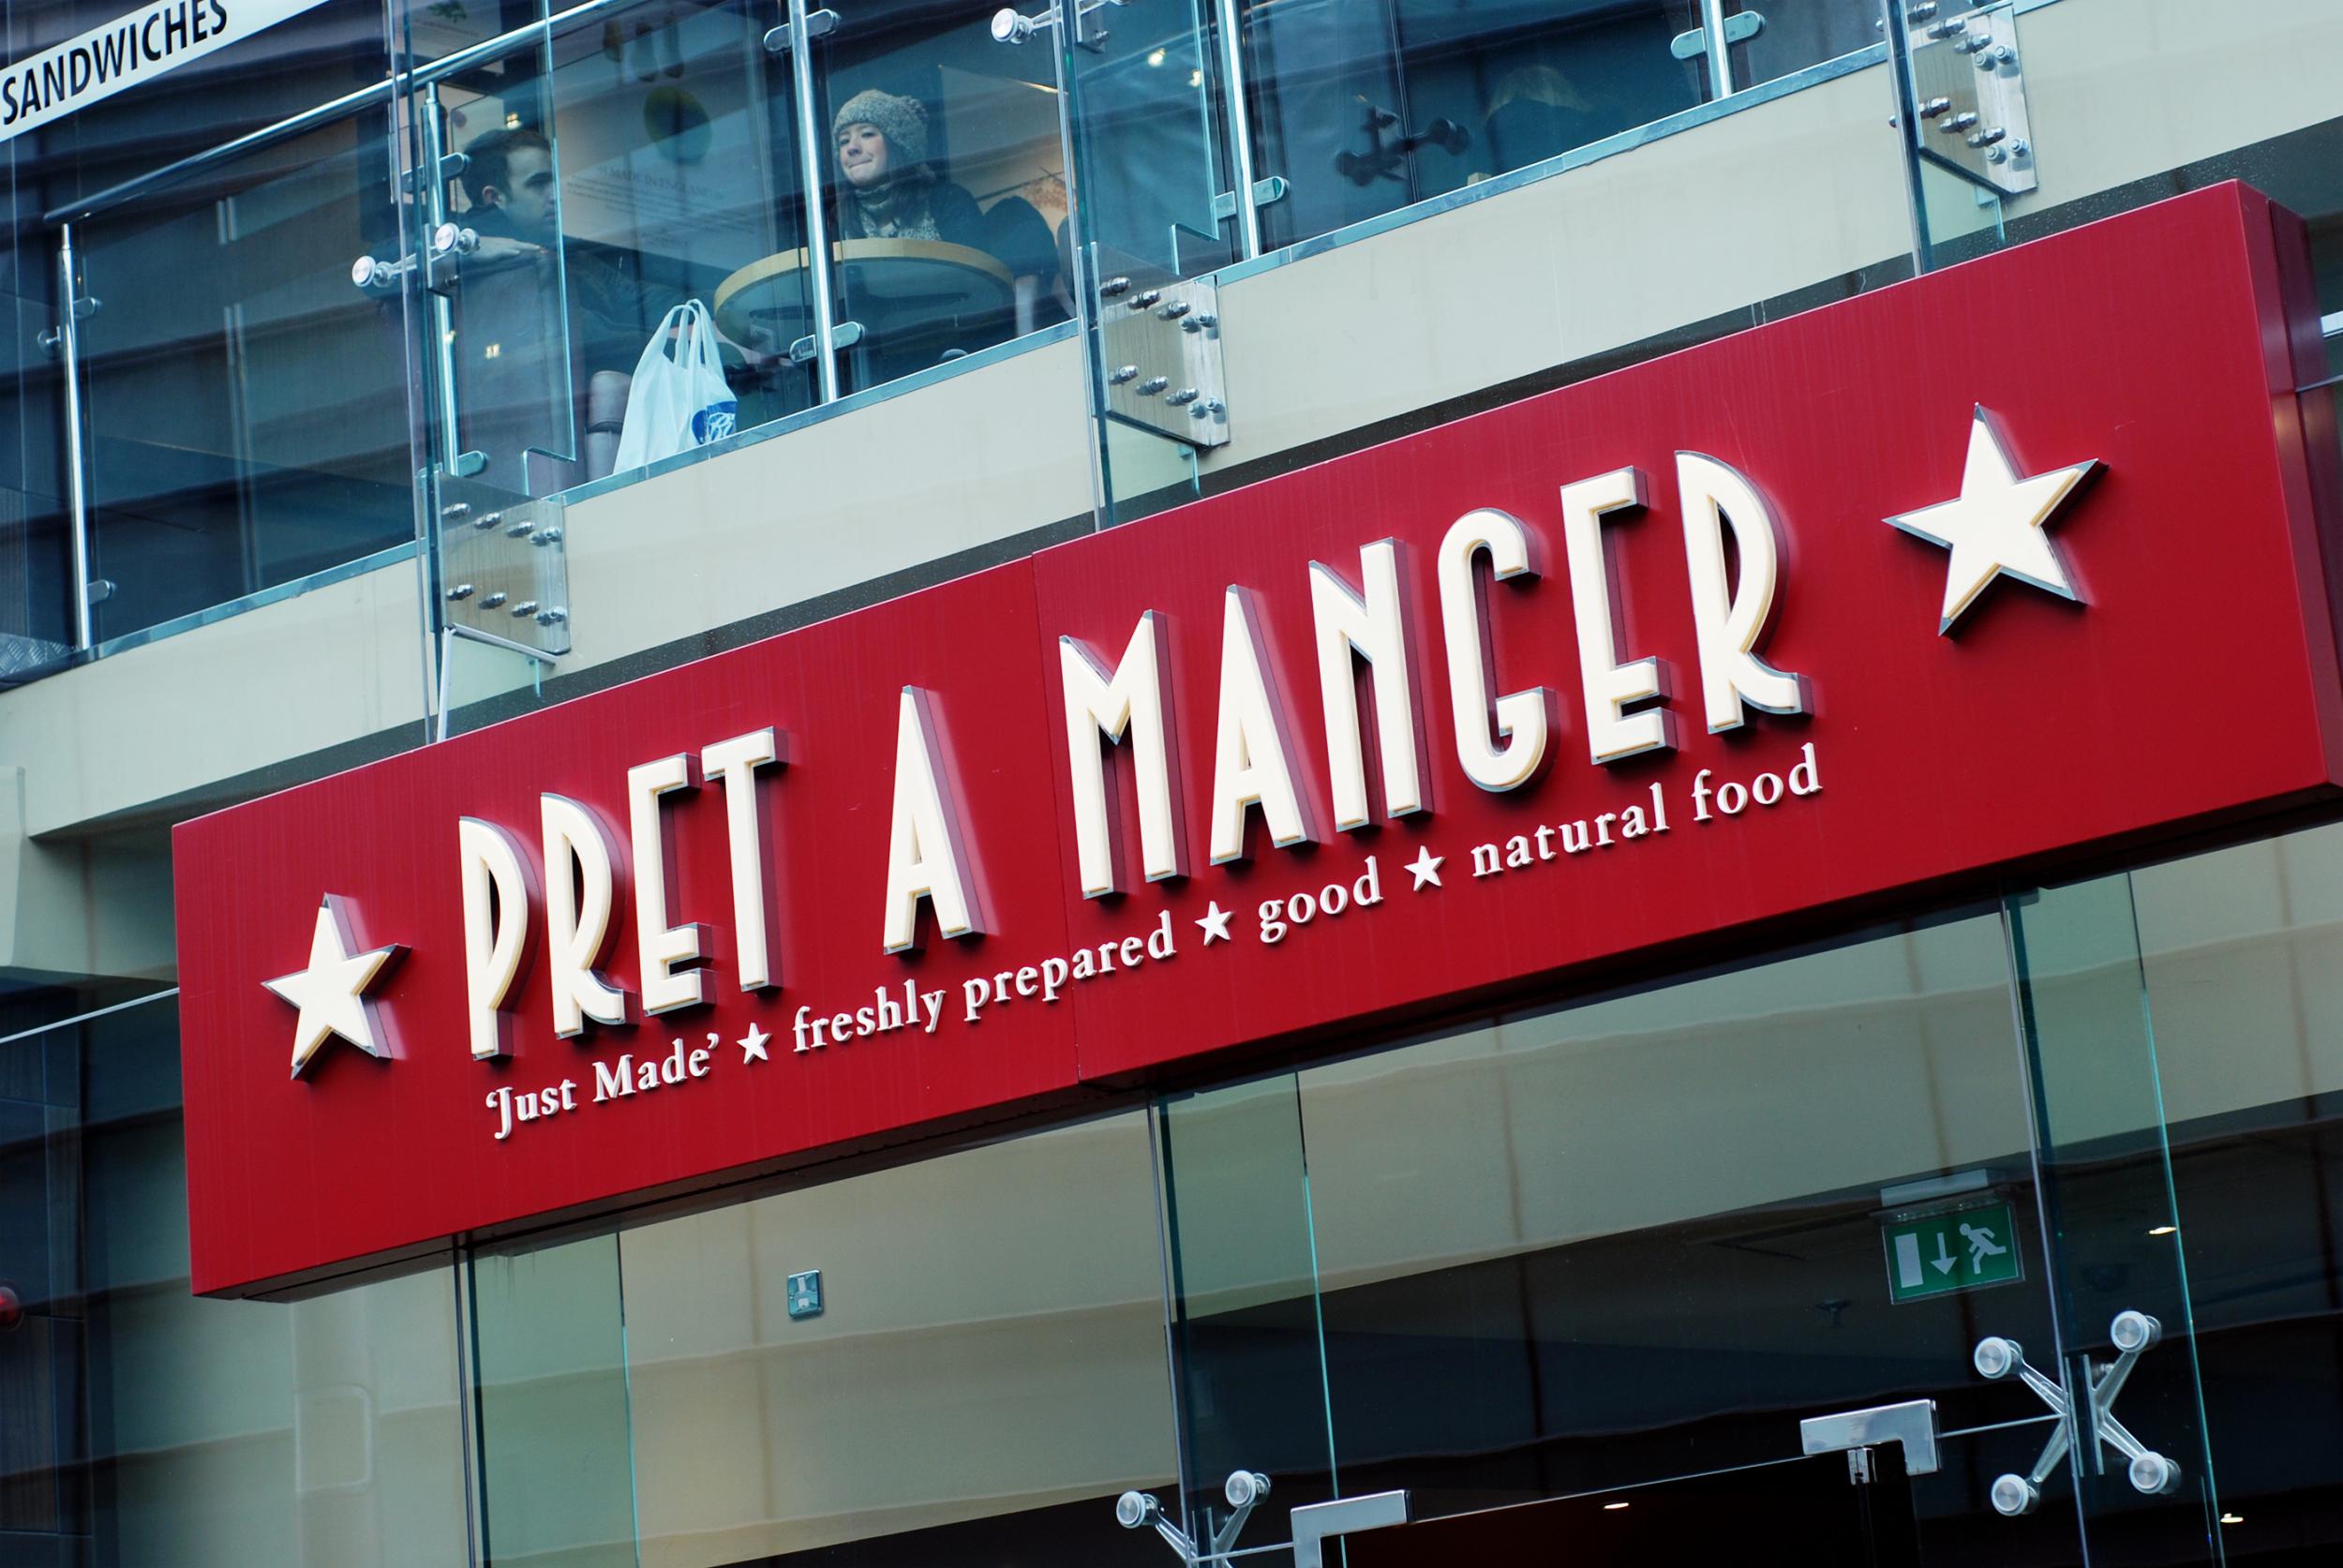 Hospitality firms like Pret were among the businesses left shuttered for the longest by restrictions designed to limit the spread of the coronavirus